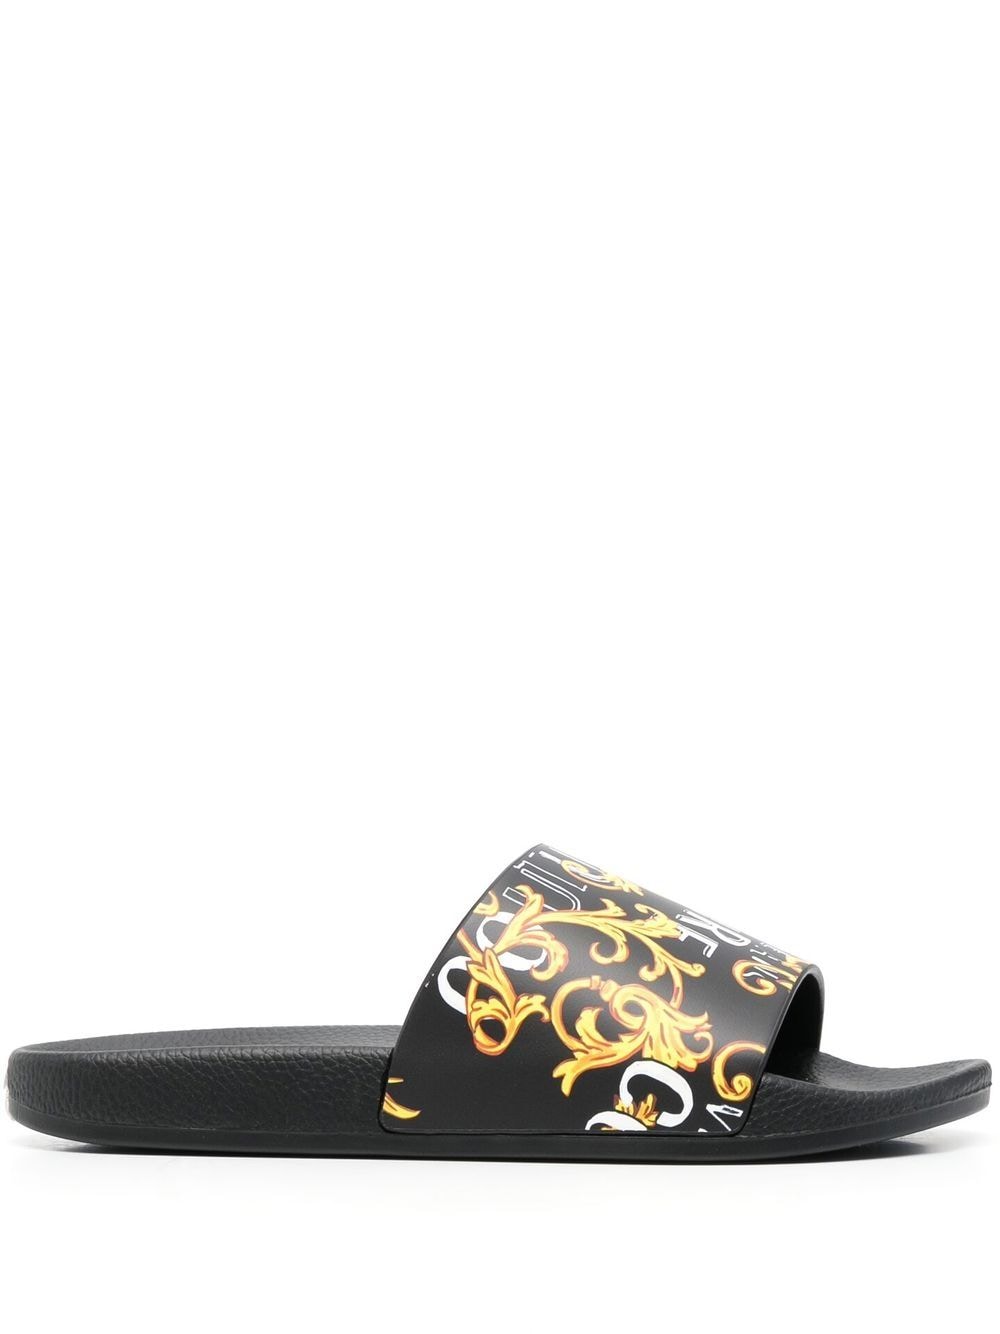 Versace Jeans Couture 'Barocco' print slides - Black von Versace Jeans Couture